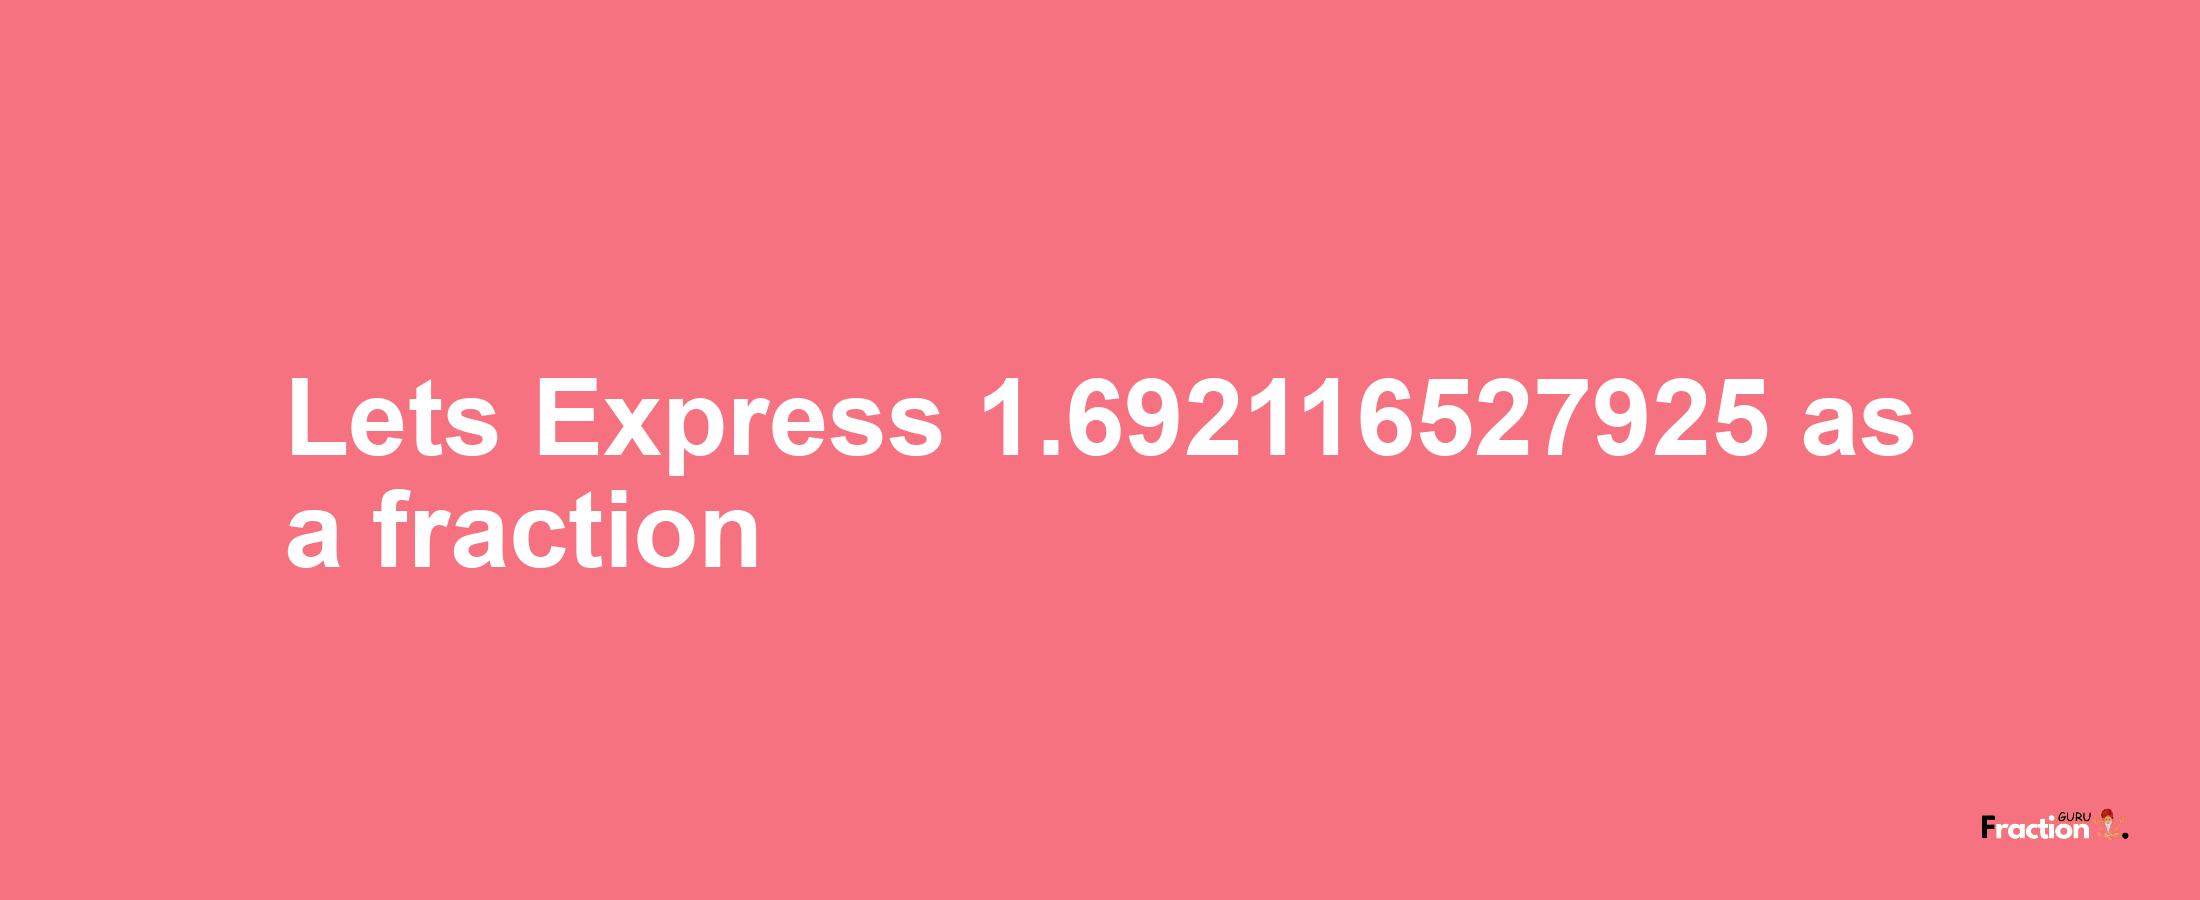 Lets Express 1.692116527925 as afraction